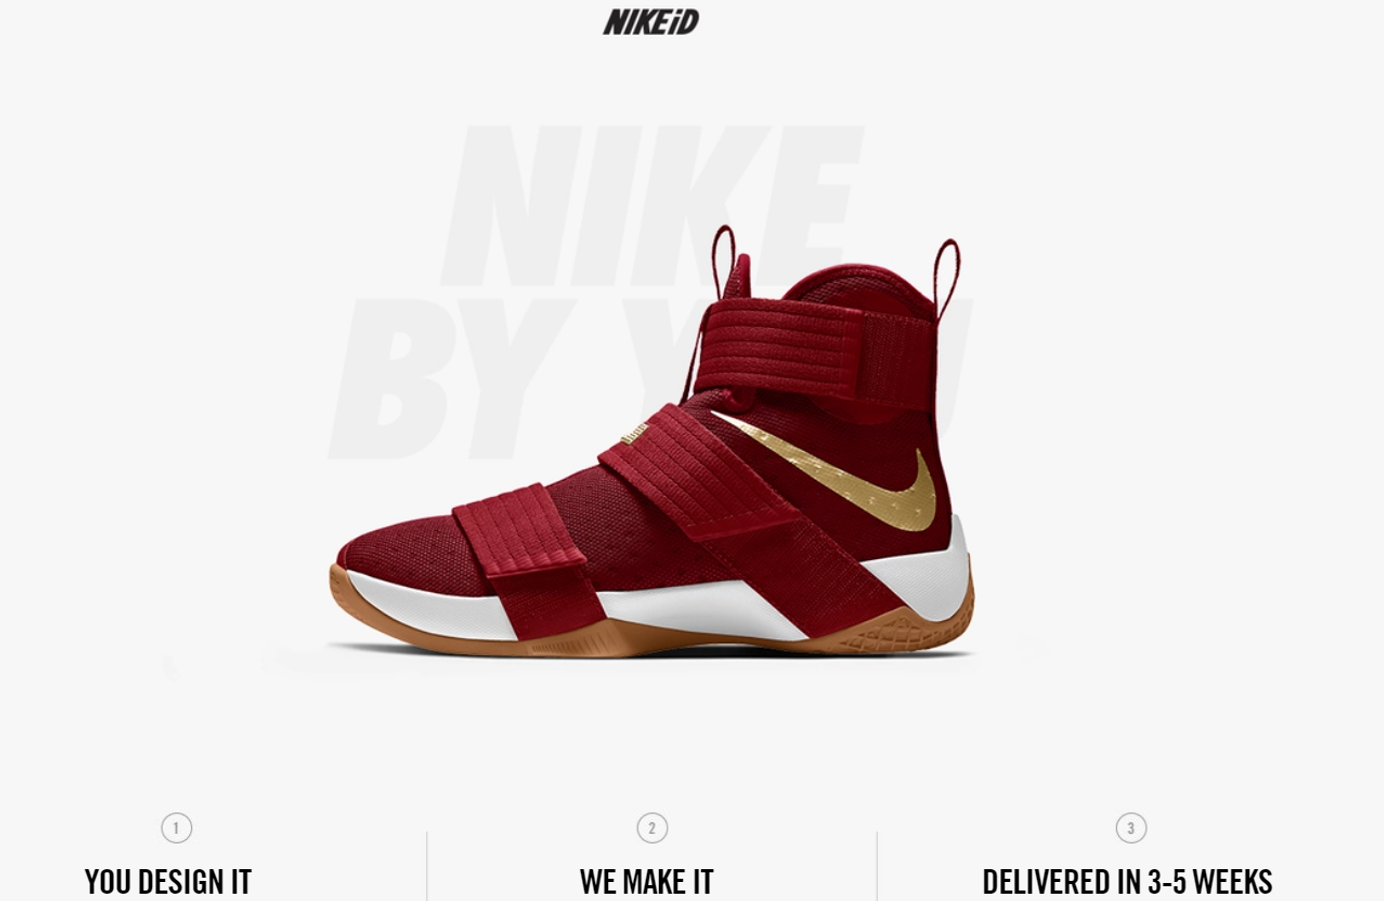 New product development - Crowdsourcing new product ideas - NIKEiD